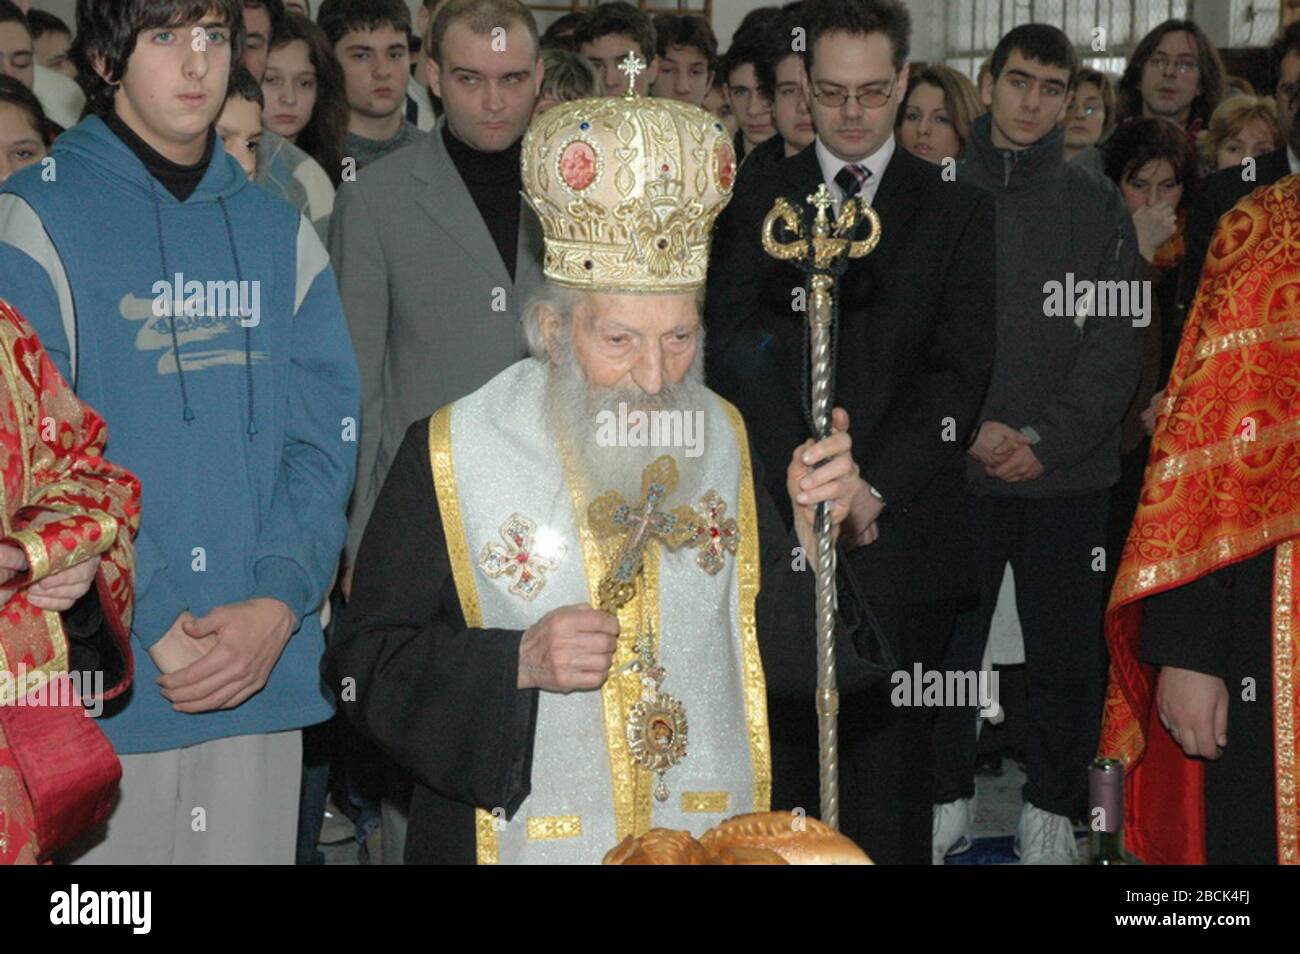 'Visit of His Holiness, the Archbishop of Peć, Metropolitan of Belgrade and Karlovci, Serbian Patriarch Pavle, to Mathematical Gymnasium Belgrade, January 25, 2005. Viewers right from His Holiness, the Archbishop of Peć, Metropolitan of Belgrade and Karlovci, Serbian Patriarch Pavle, is then Principal of Mathematical Gymnasium Belgrade, professor Vladimir Dragović.This picture taken in Mathematical Gymnasium Belgrade sports facility.; http://mg.edu.rs/components/com joomgallery/img originals/ 2/    6/  20100422 1936671105.jpg; MGB; ' Stock Photo